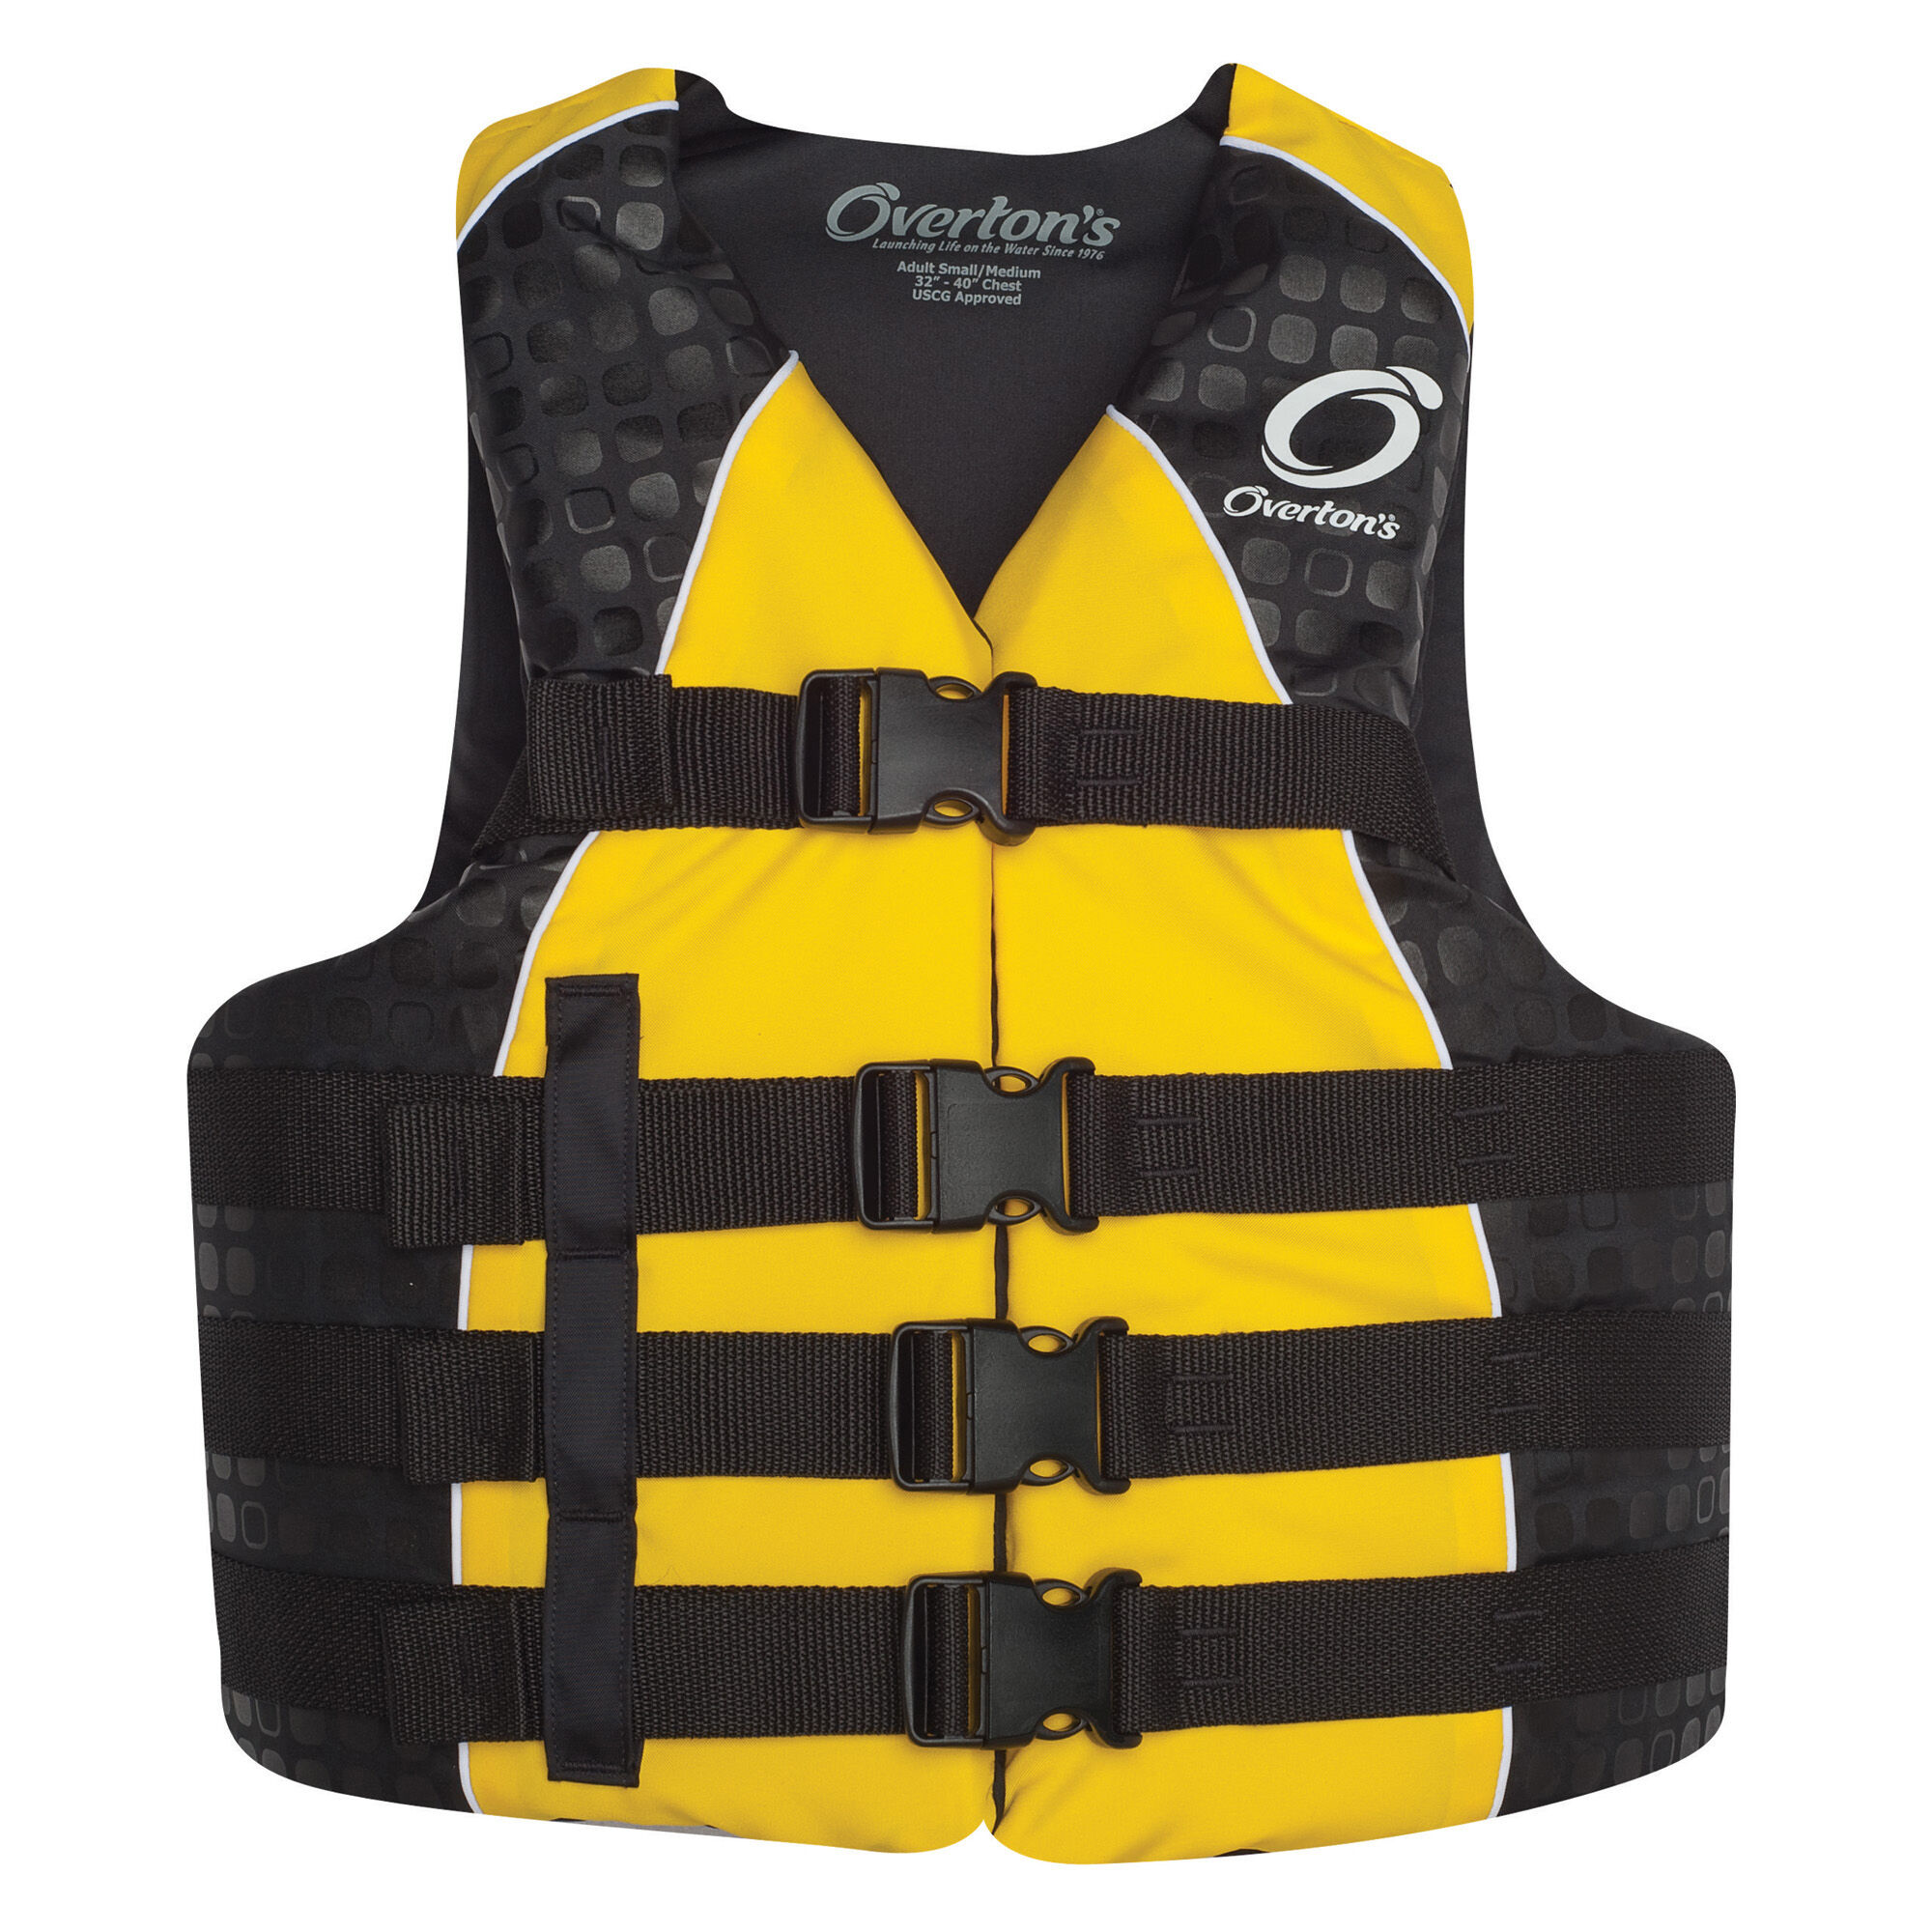 BOAT MARINE WATERSPORTS ADULT LIFE JACKET VEST PFD YELLOW 90LBS & UP CH-30"-52" 